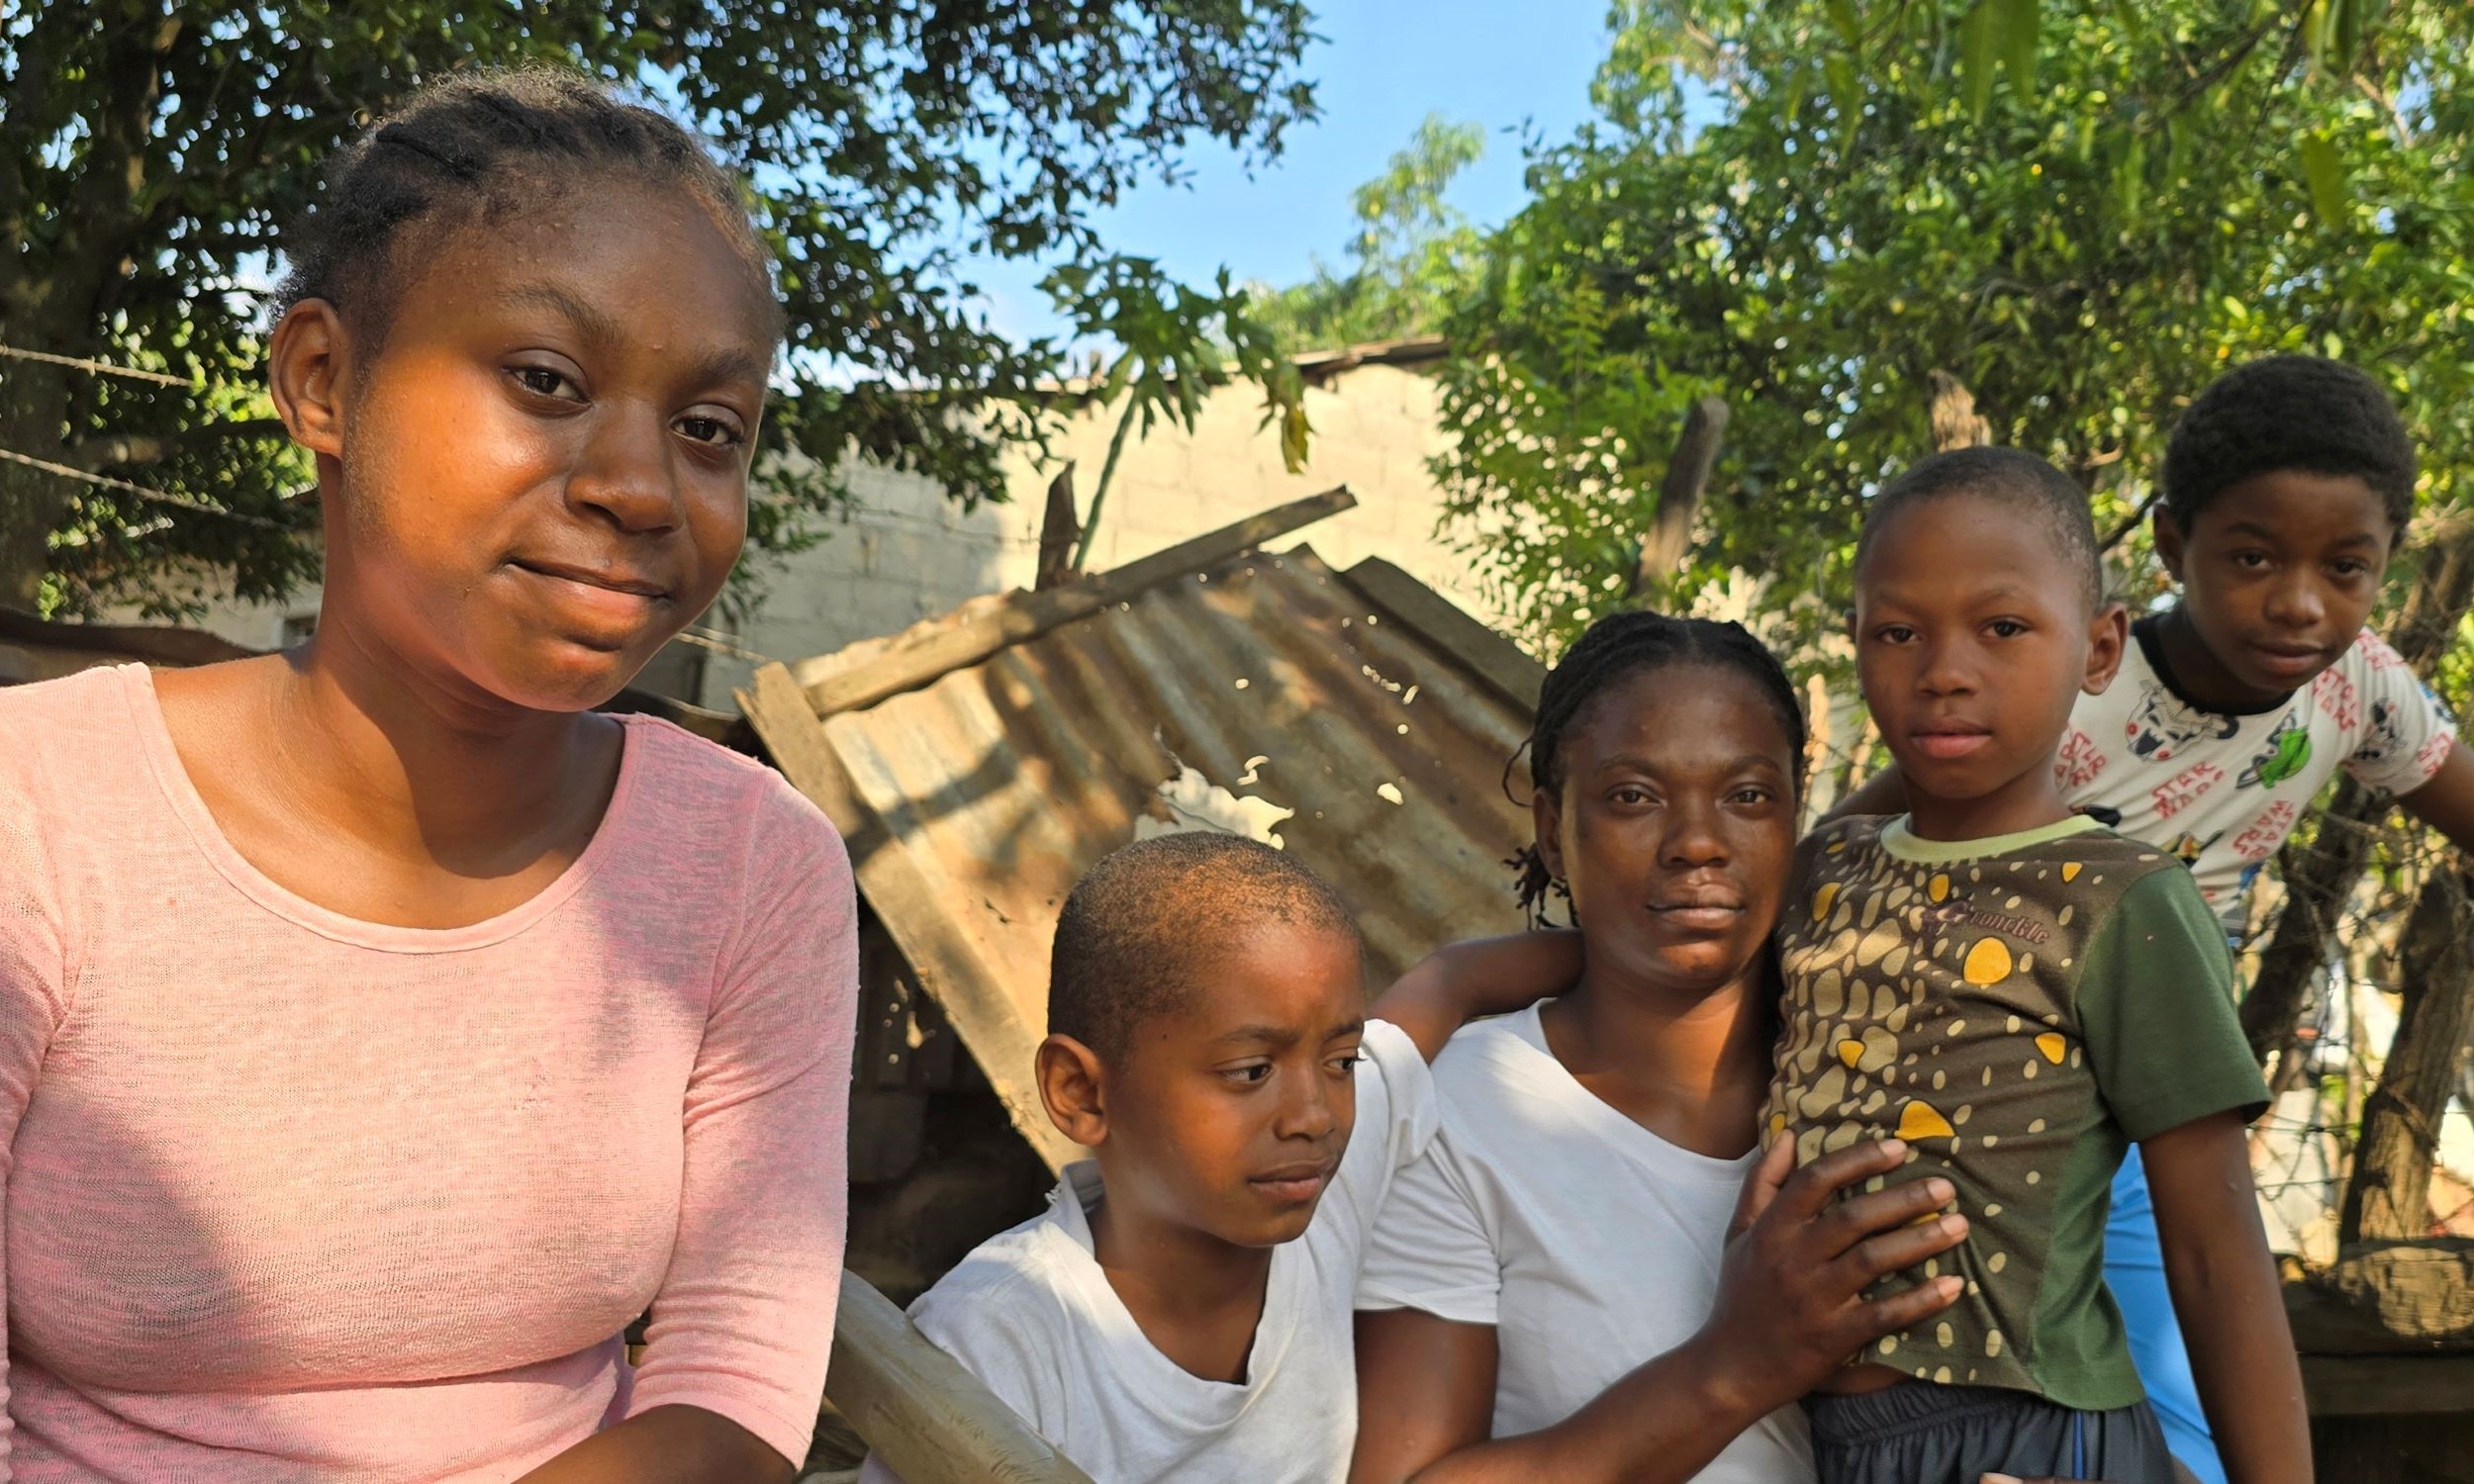 29-year-old Haitian mum with her four children, struggling to survive hunger in Dominican Republic